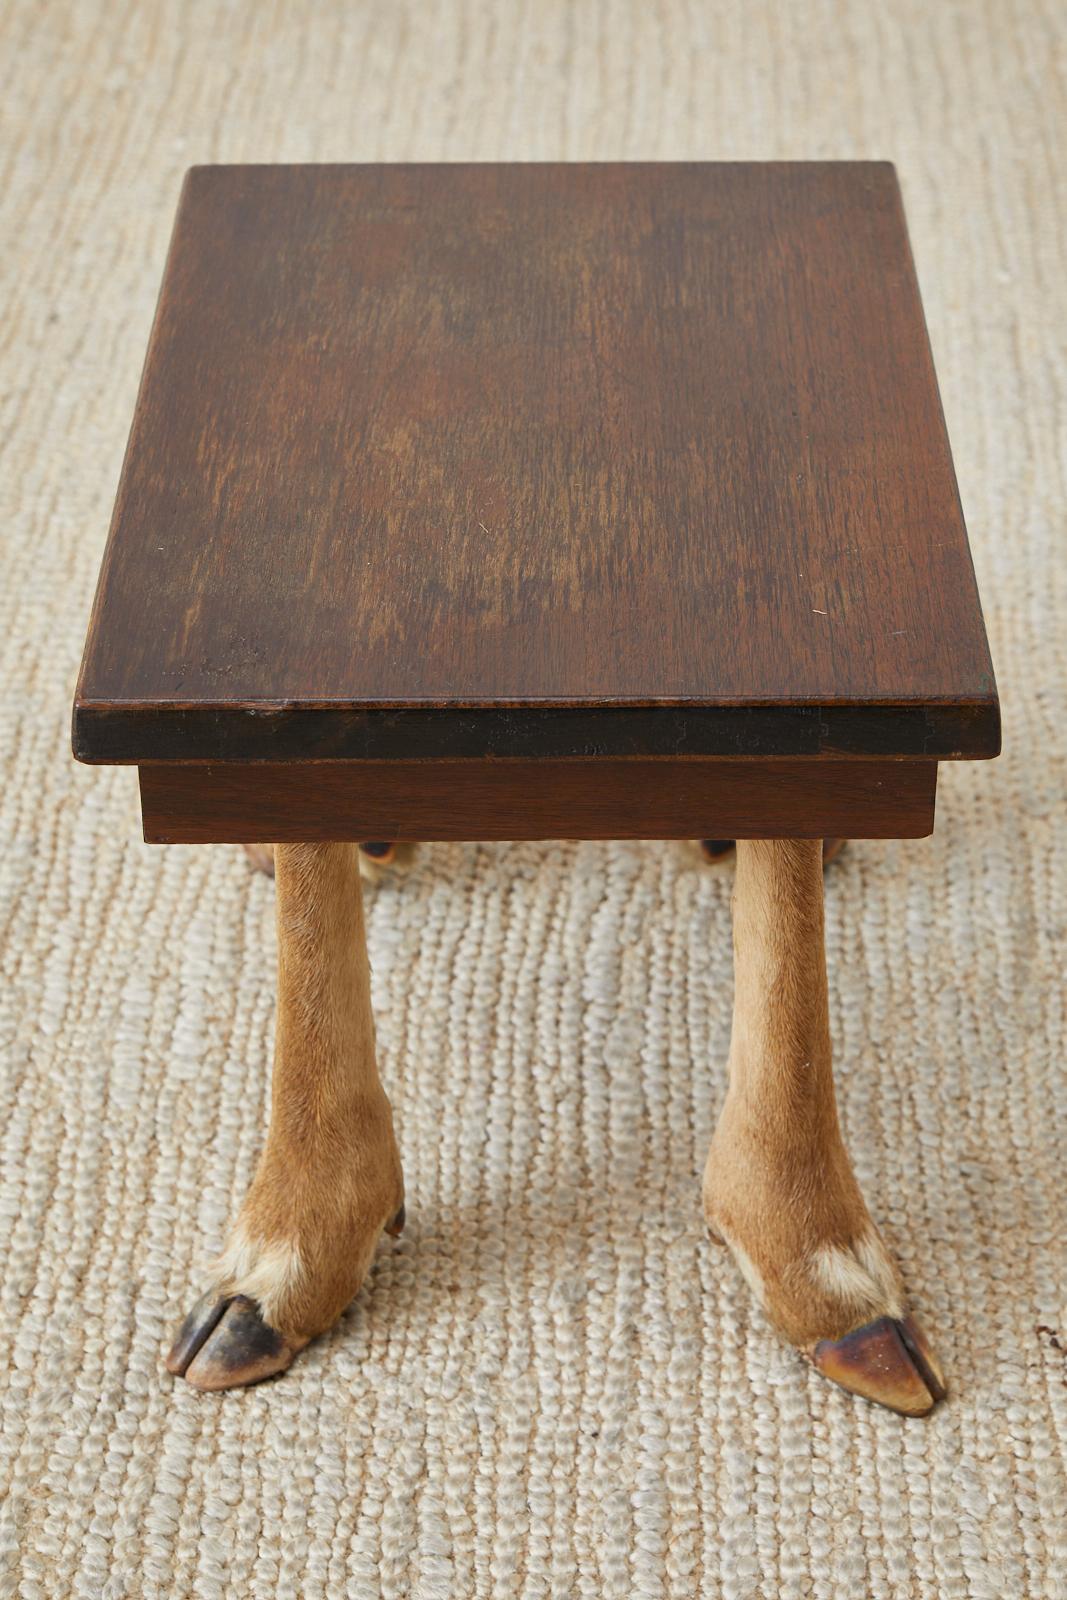 Rustic French Taxidermy Deer Leg Stool or Drinks Table 2